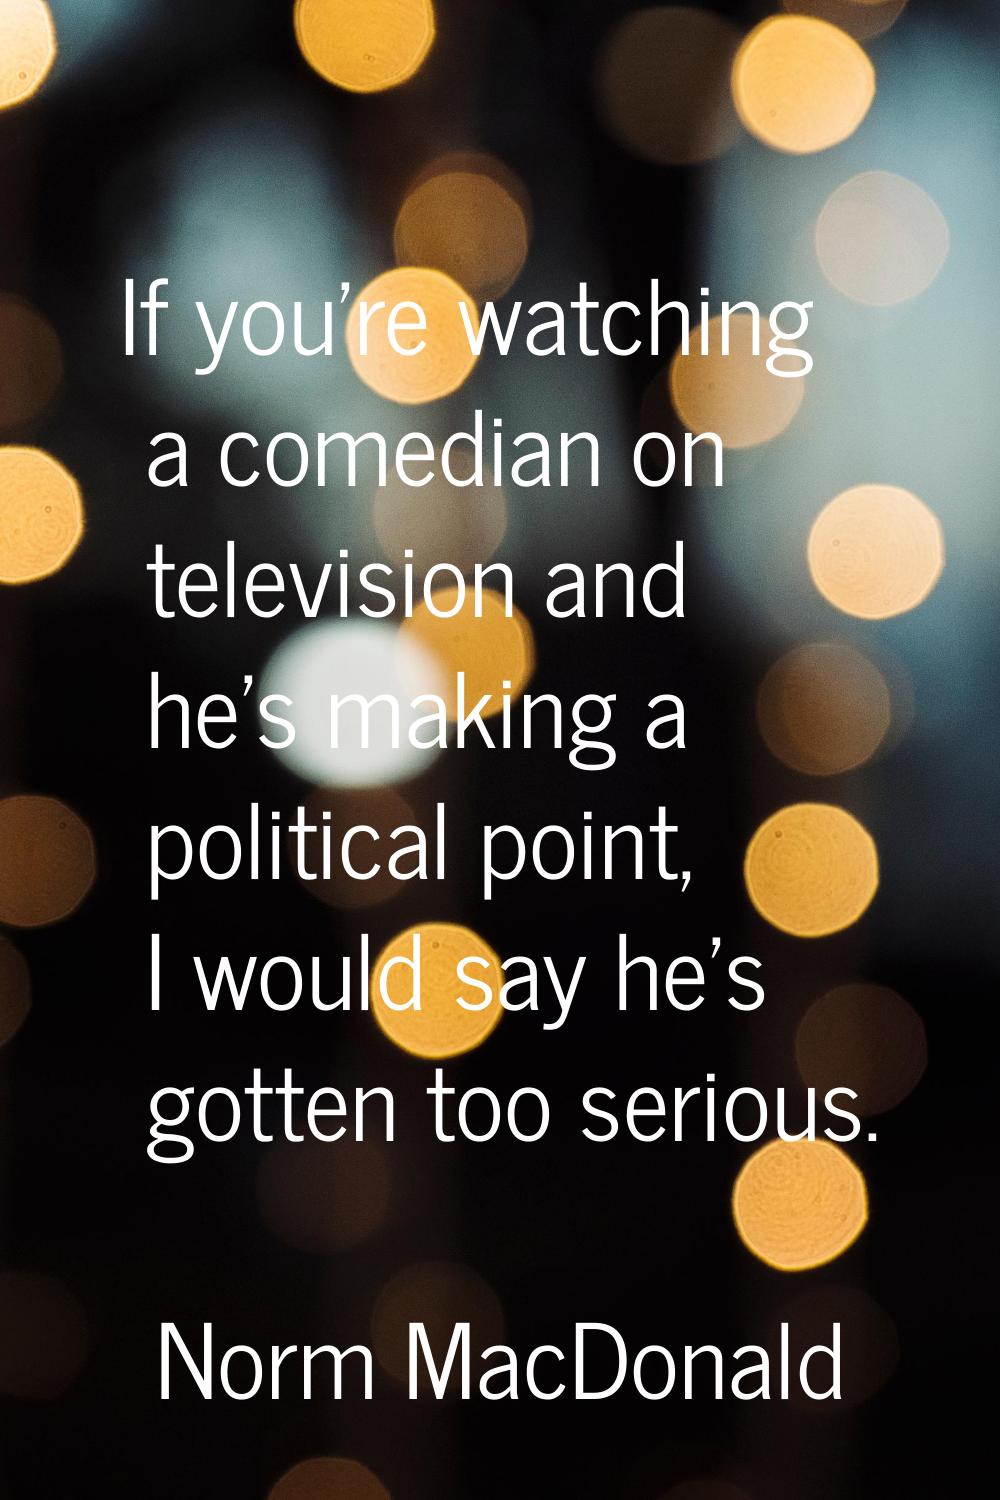 If you're watching a comedian on television and he's making a political point, I would say he's got